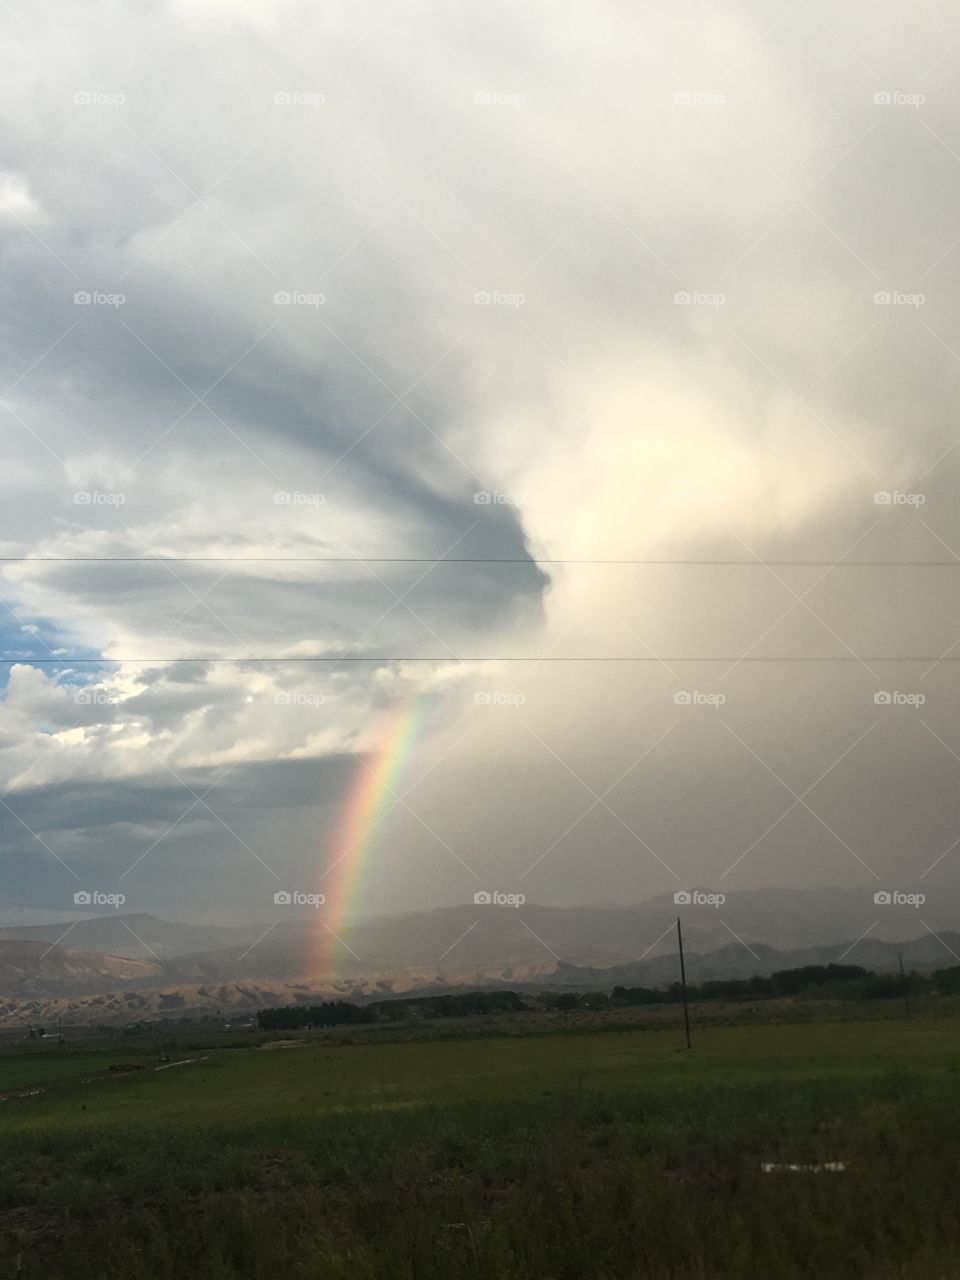 Clouds spilling rainbow